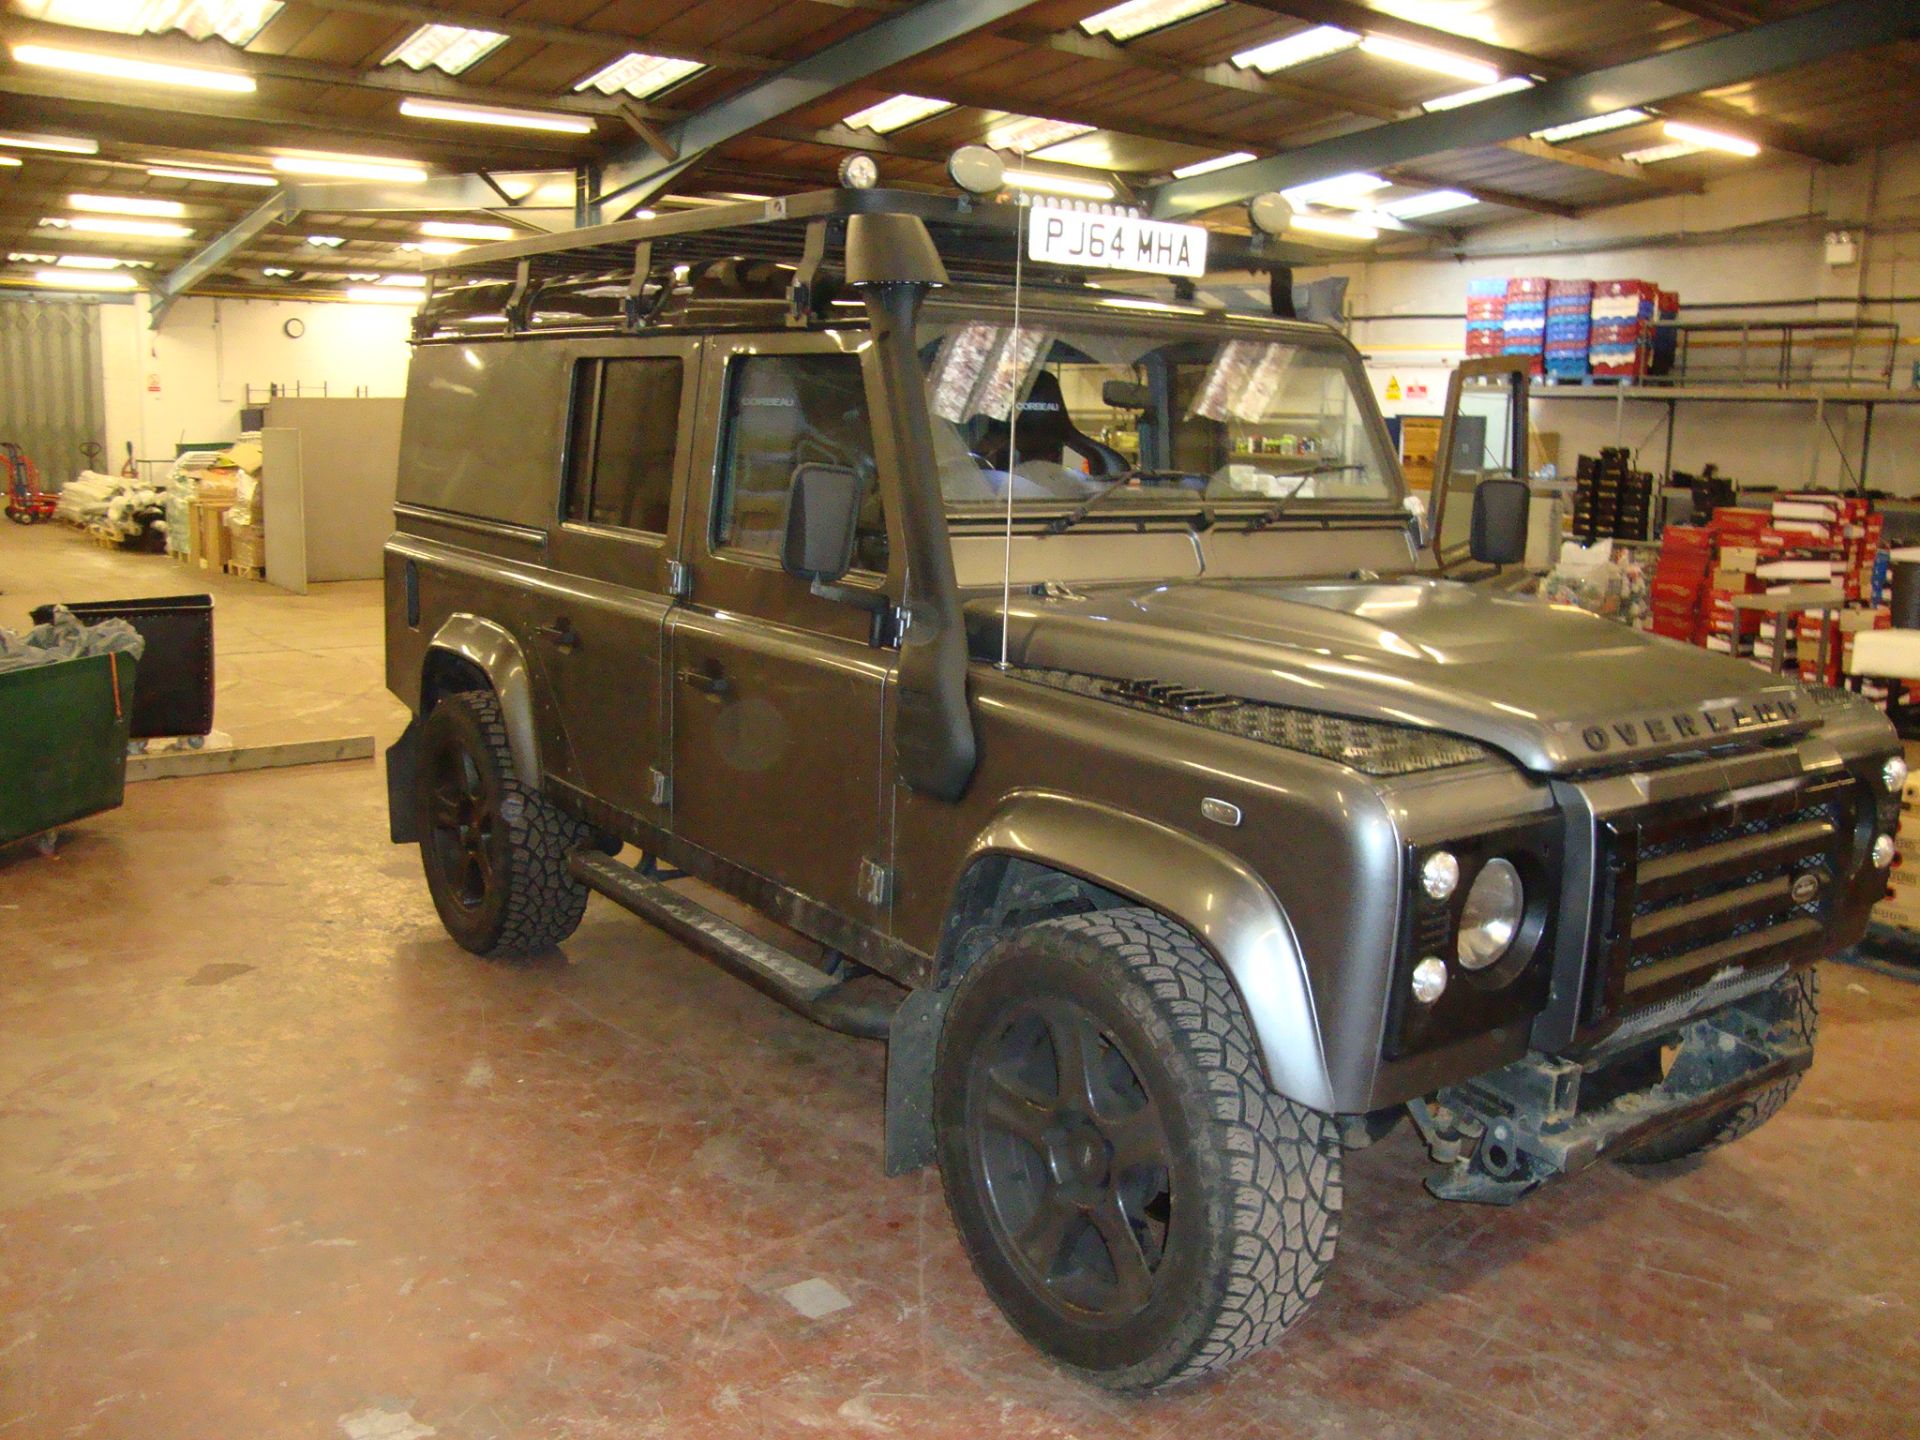 2014 Land Rover Defender 110 XS 2.2 TDCi Utility Wagon SMC Over Land Flat Dog Special